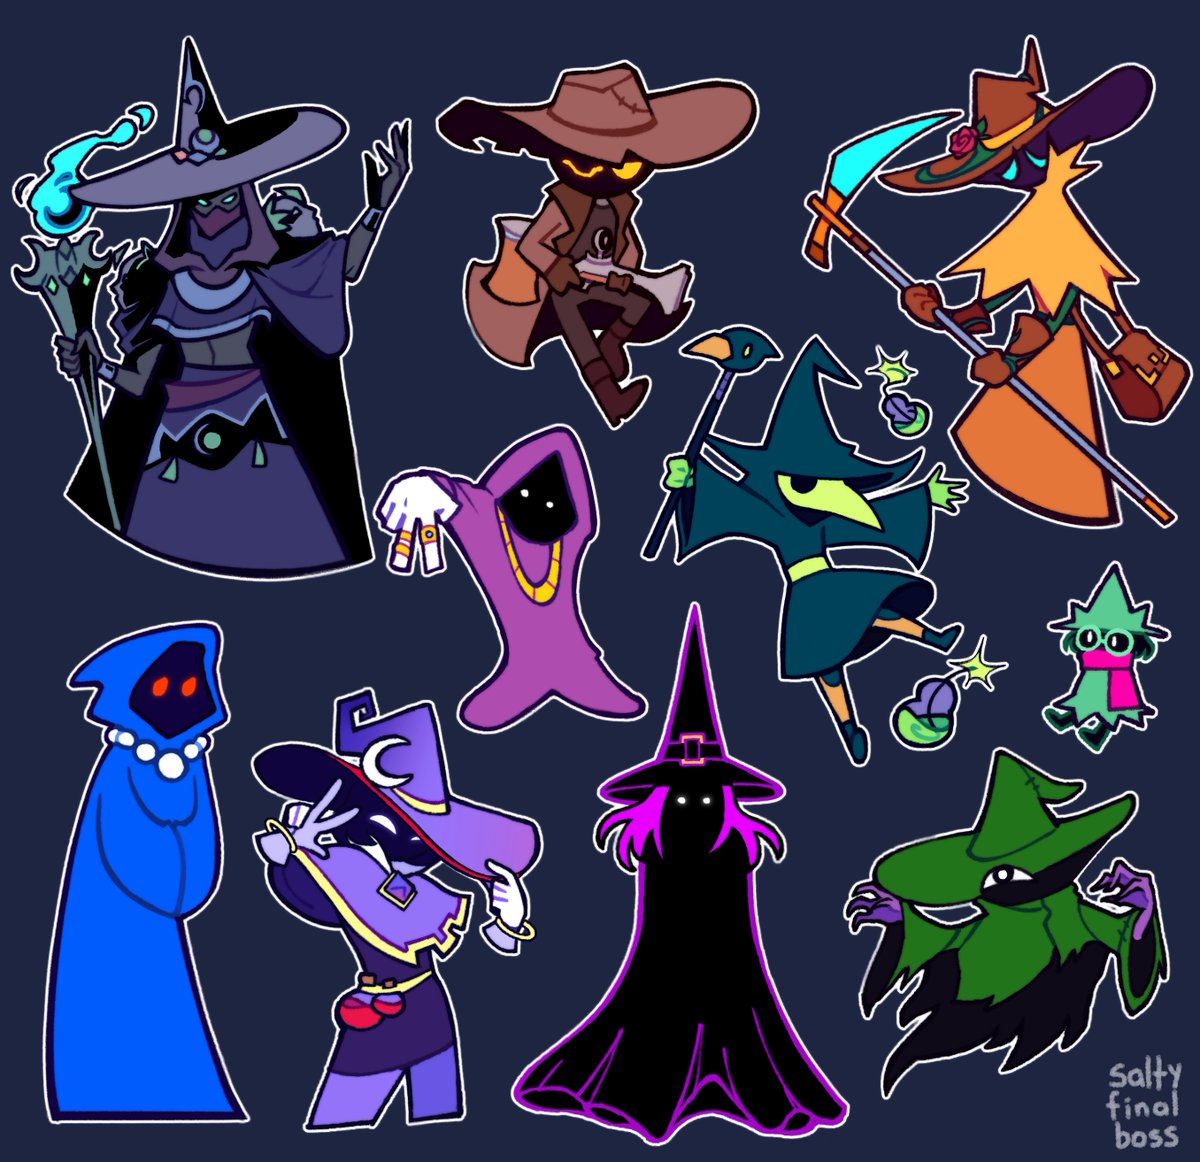 assortment of wizard(-y) characters i've been meaning to show some love for :] have a nice wizard wednesday ! 🧙‍♂️✨ [ #deadcells #shovelknight #everhood #deltarune ]